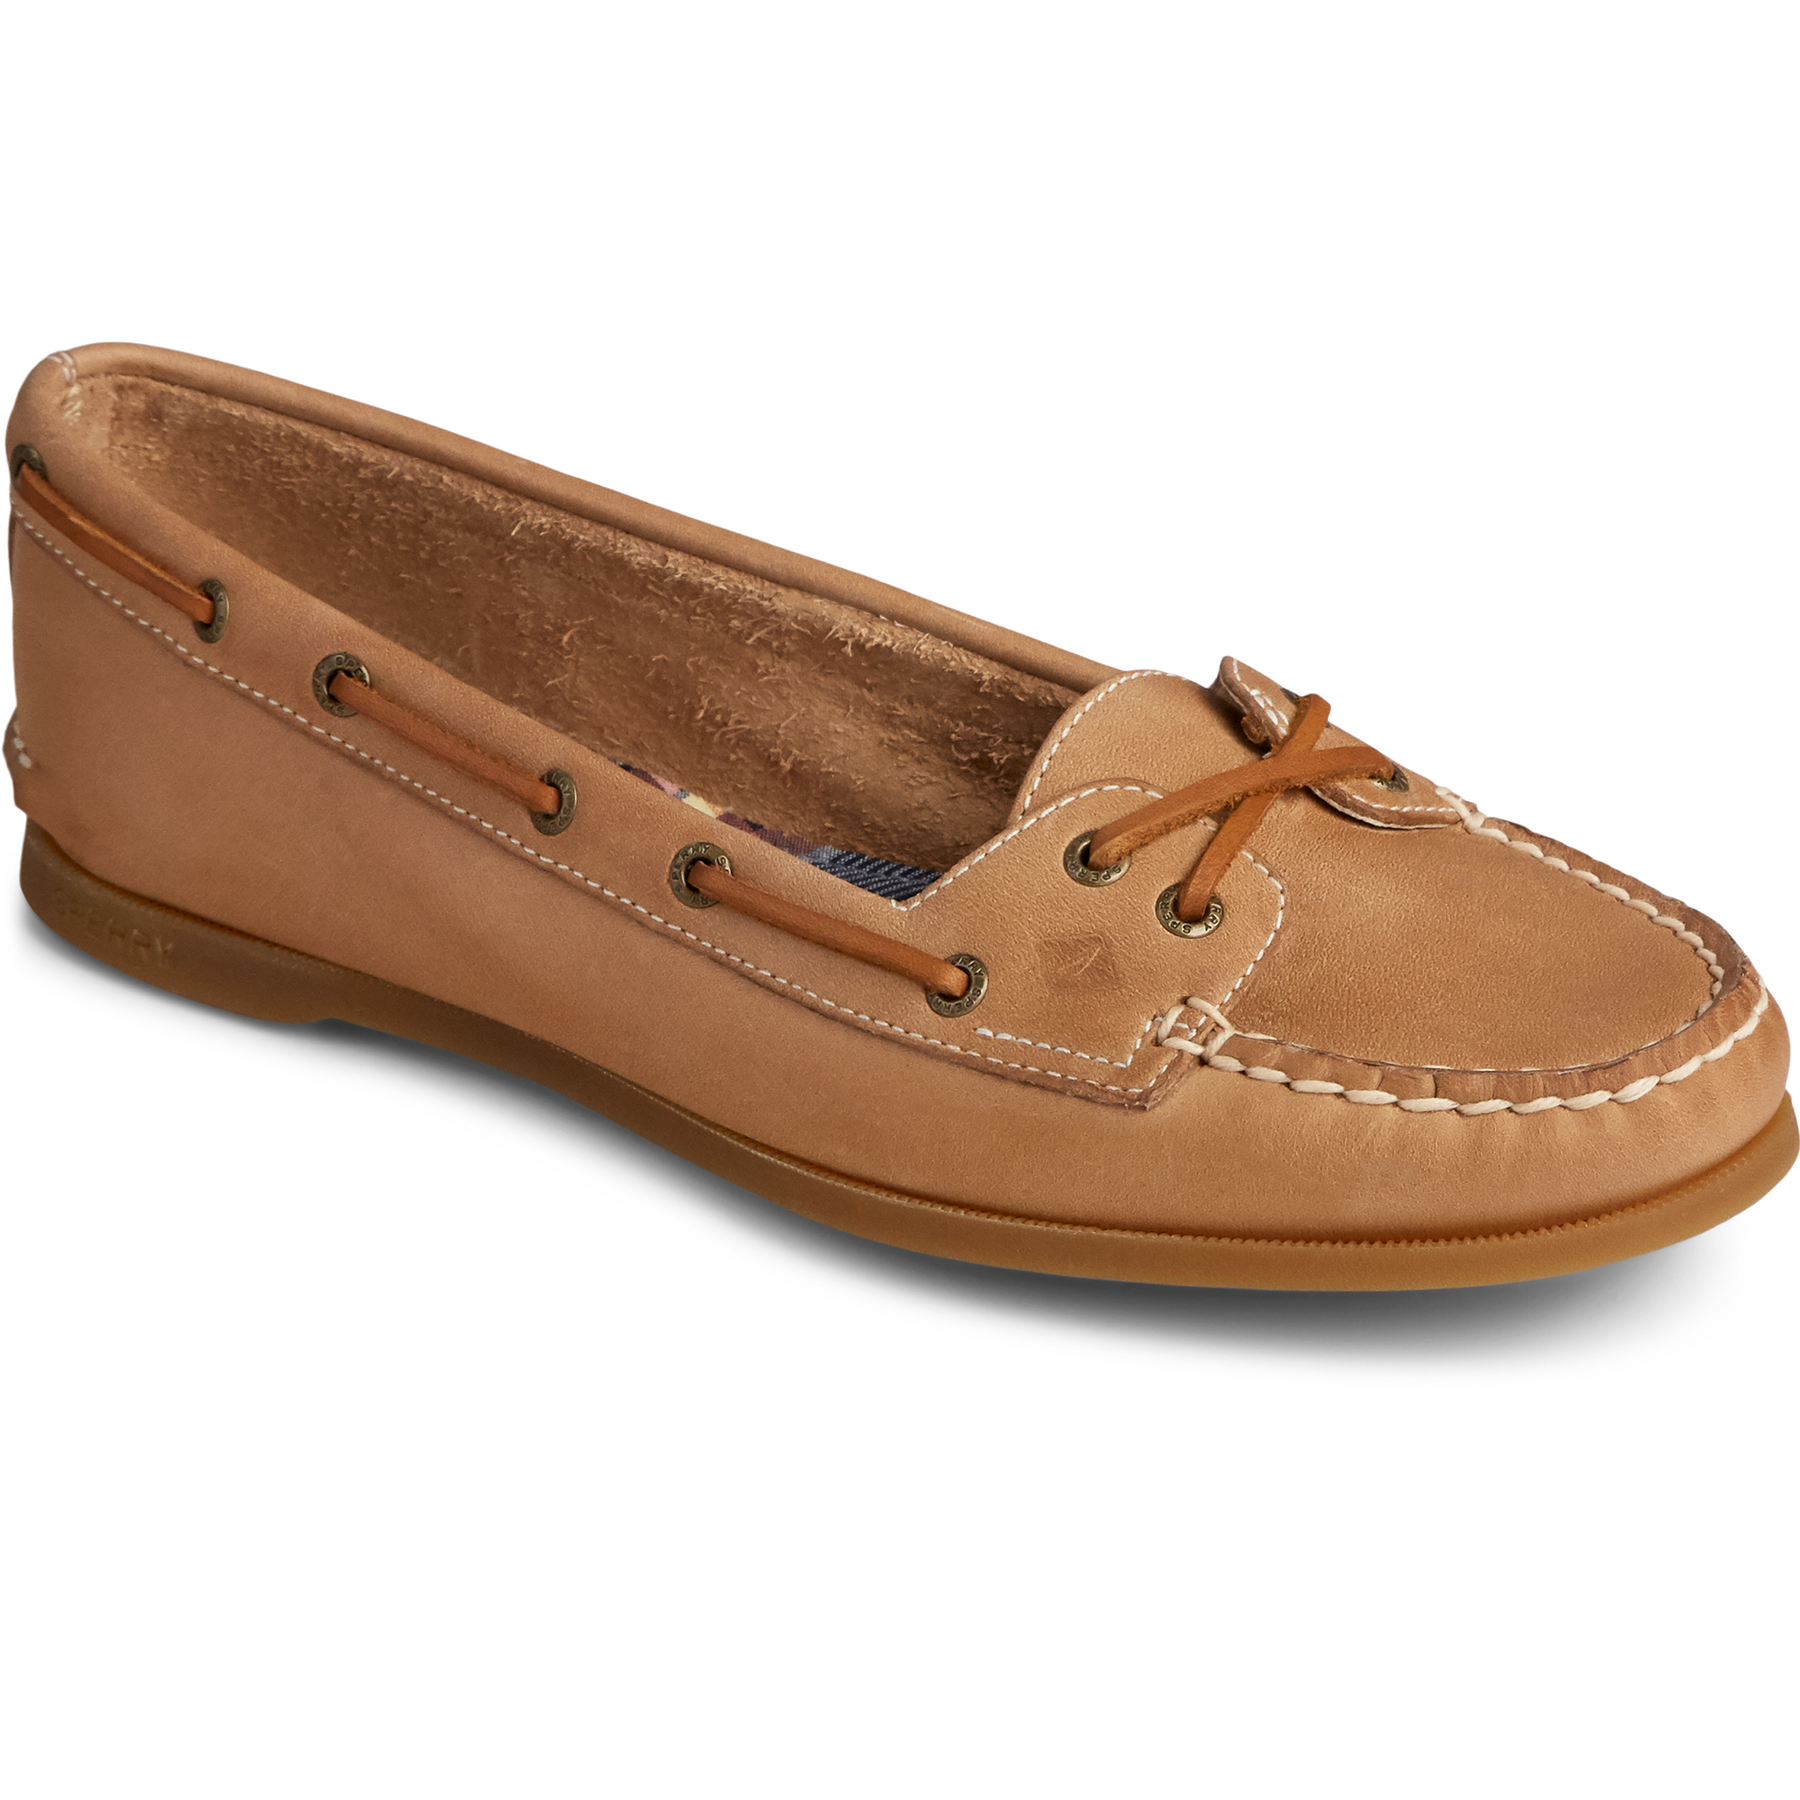 Women's Authentic Original Boat Shoe Skimmer Leather Sahara STS846510